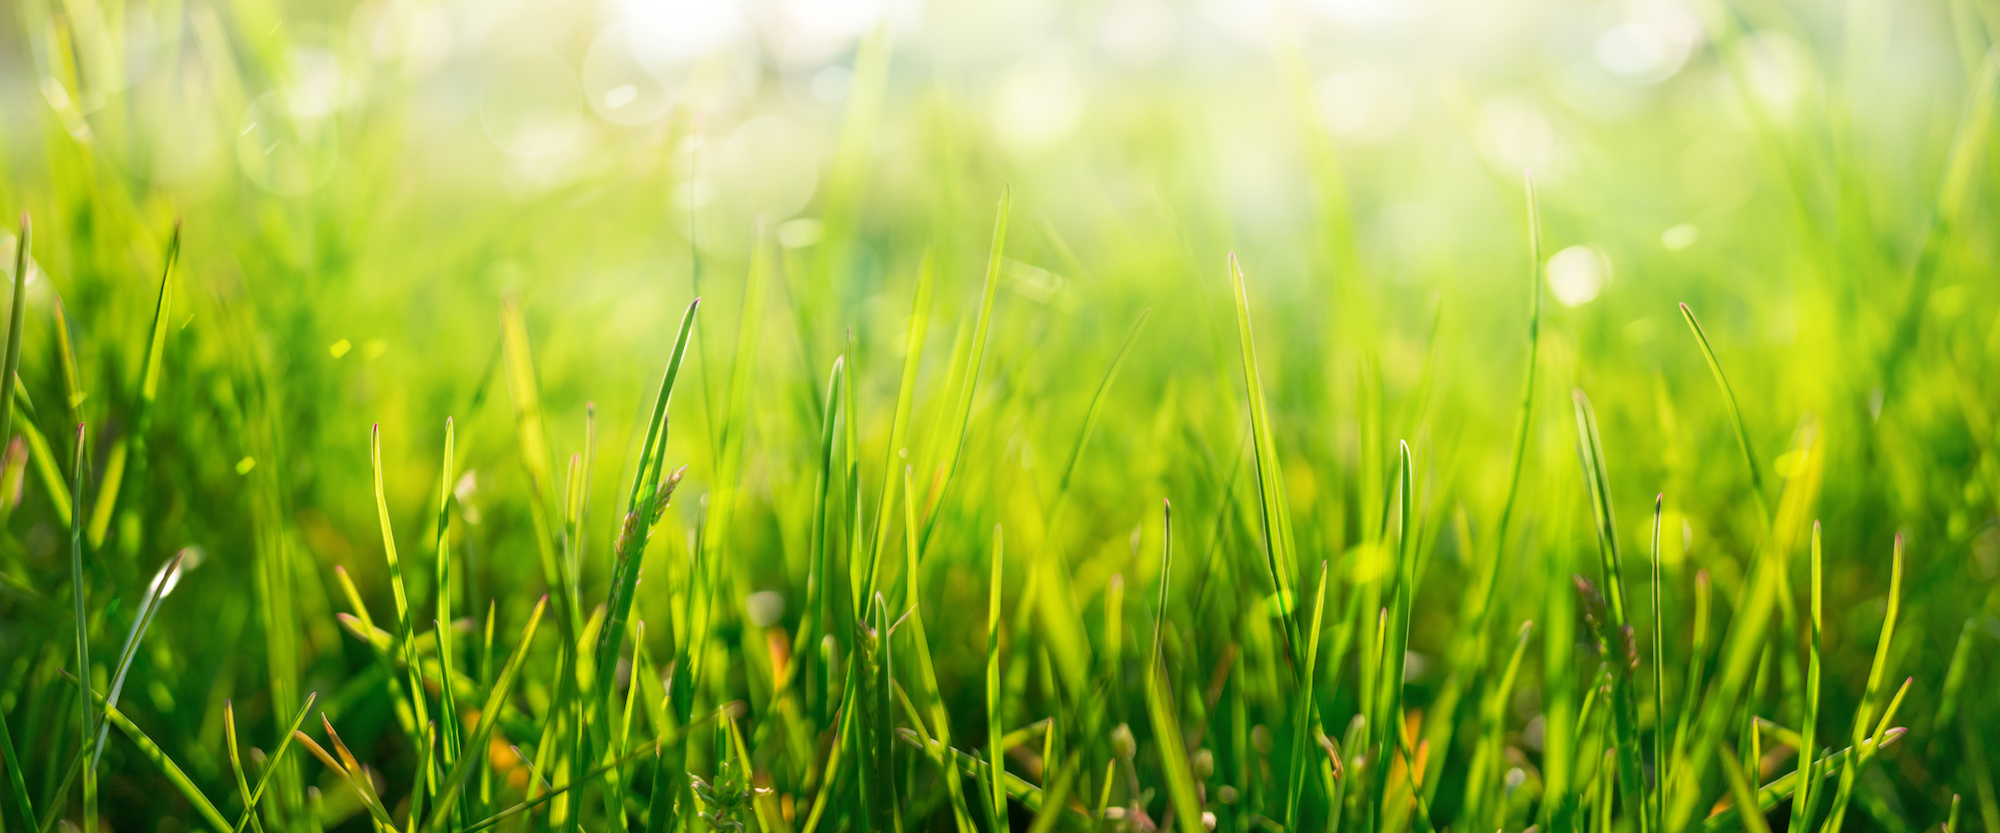 green grass background in spring meadow